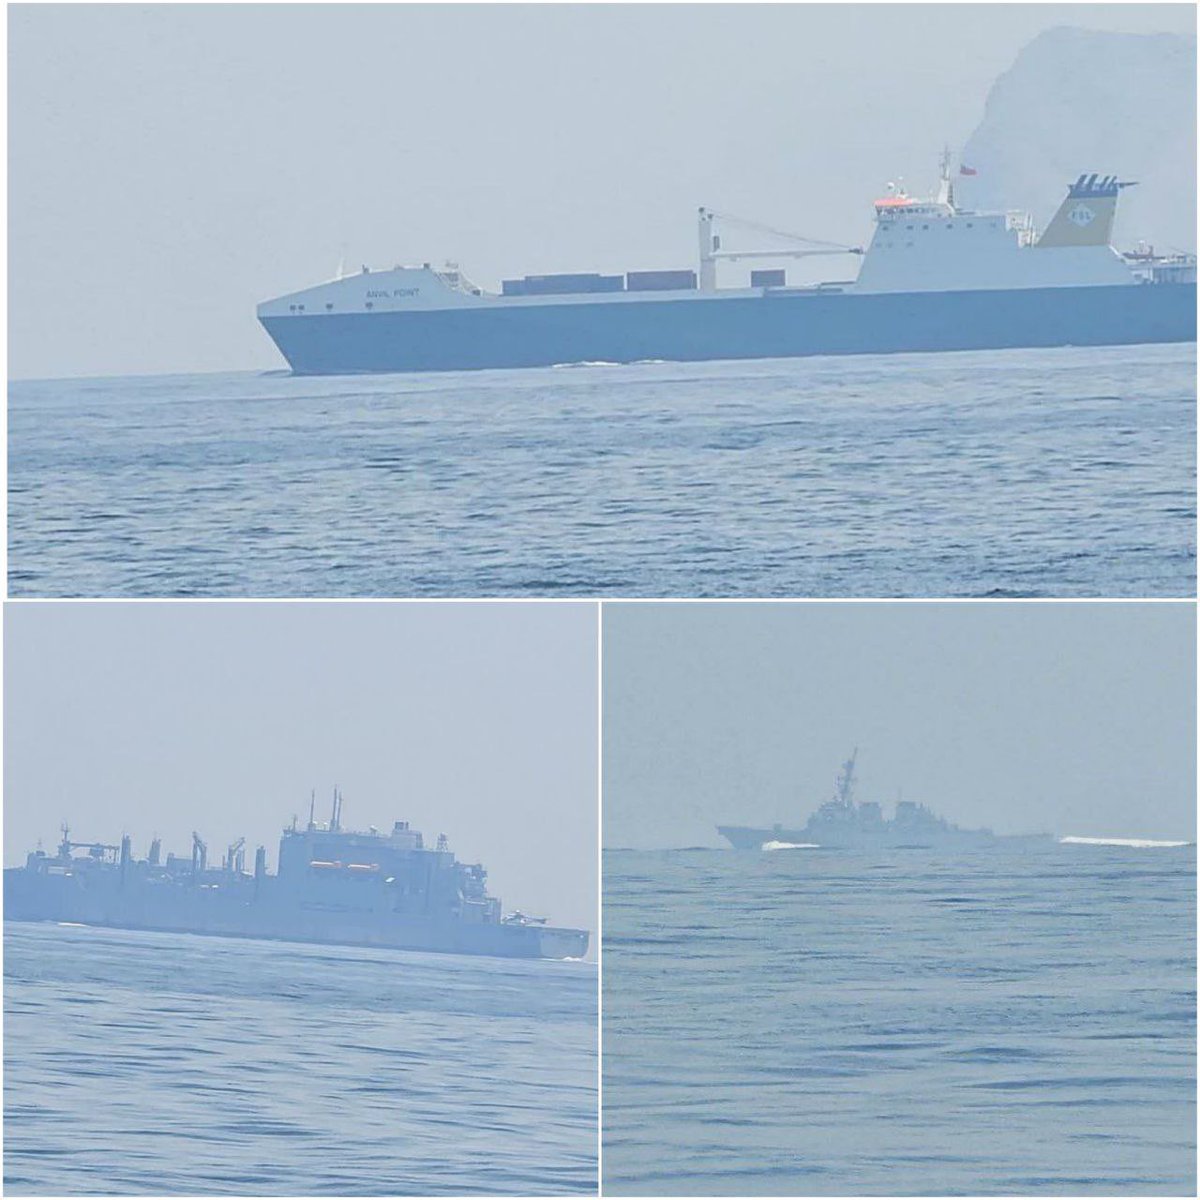 “ IRGC release of surveillance images of 🇺🇸 American ship Hamilton while passing through the Strait of Hormuz, Hamilton DDG60 warship has passed through the Strait of Hormuz along with a support vessel called TAKE6.”